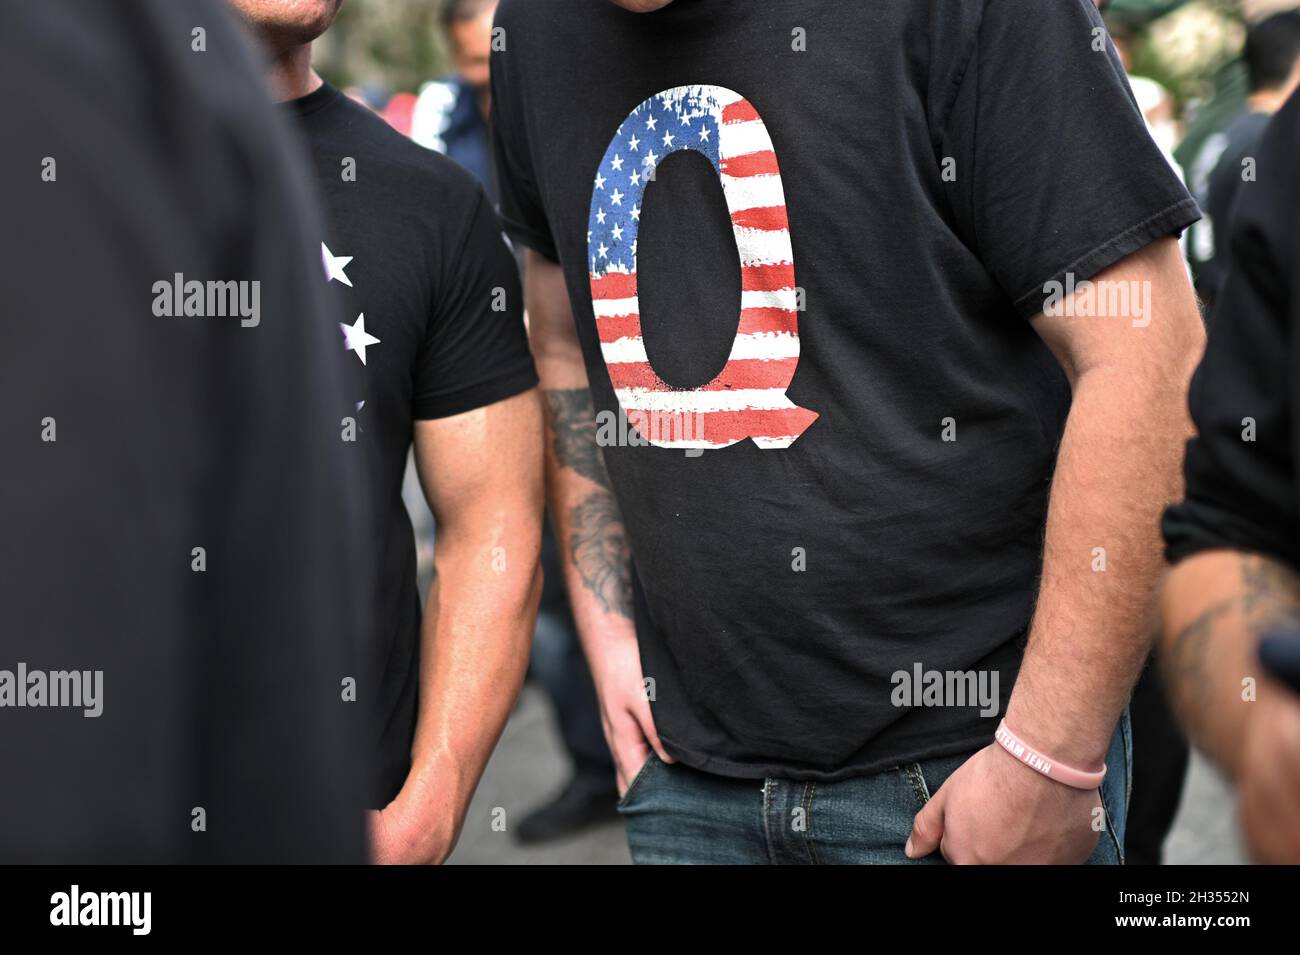 A man wearing a QAnon t-shirt attends a rally in front of City hall during the “Anti-Mandate March For Choice”, New York, NY, October 25, 2021. New York City Mayor Bill de Blasio imposed a mandate starting Nov. 1 that all municipal workers, including NYPD officers, FDNY, Sanitation workers and teachers recieve the COVID-19 vaccine or risk losing pay. (Photo by Anthony Behar/Sipa USA) Stock Photo